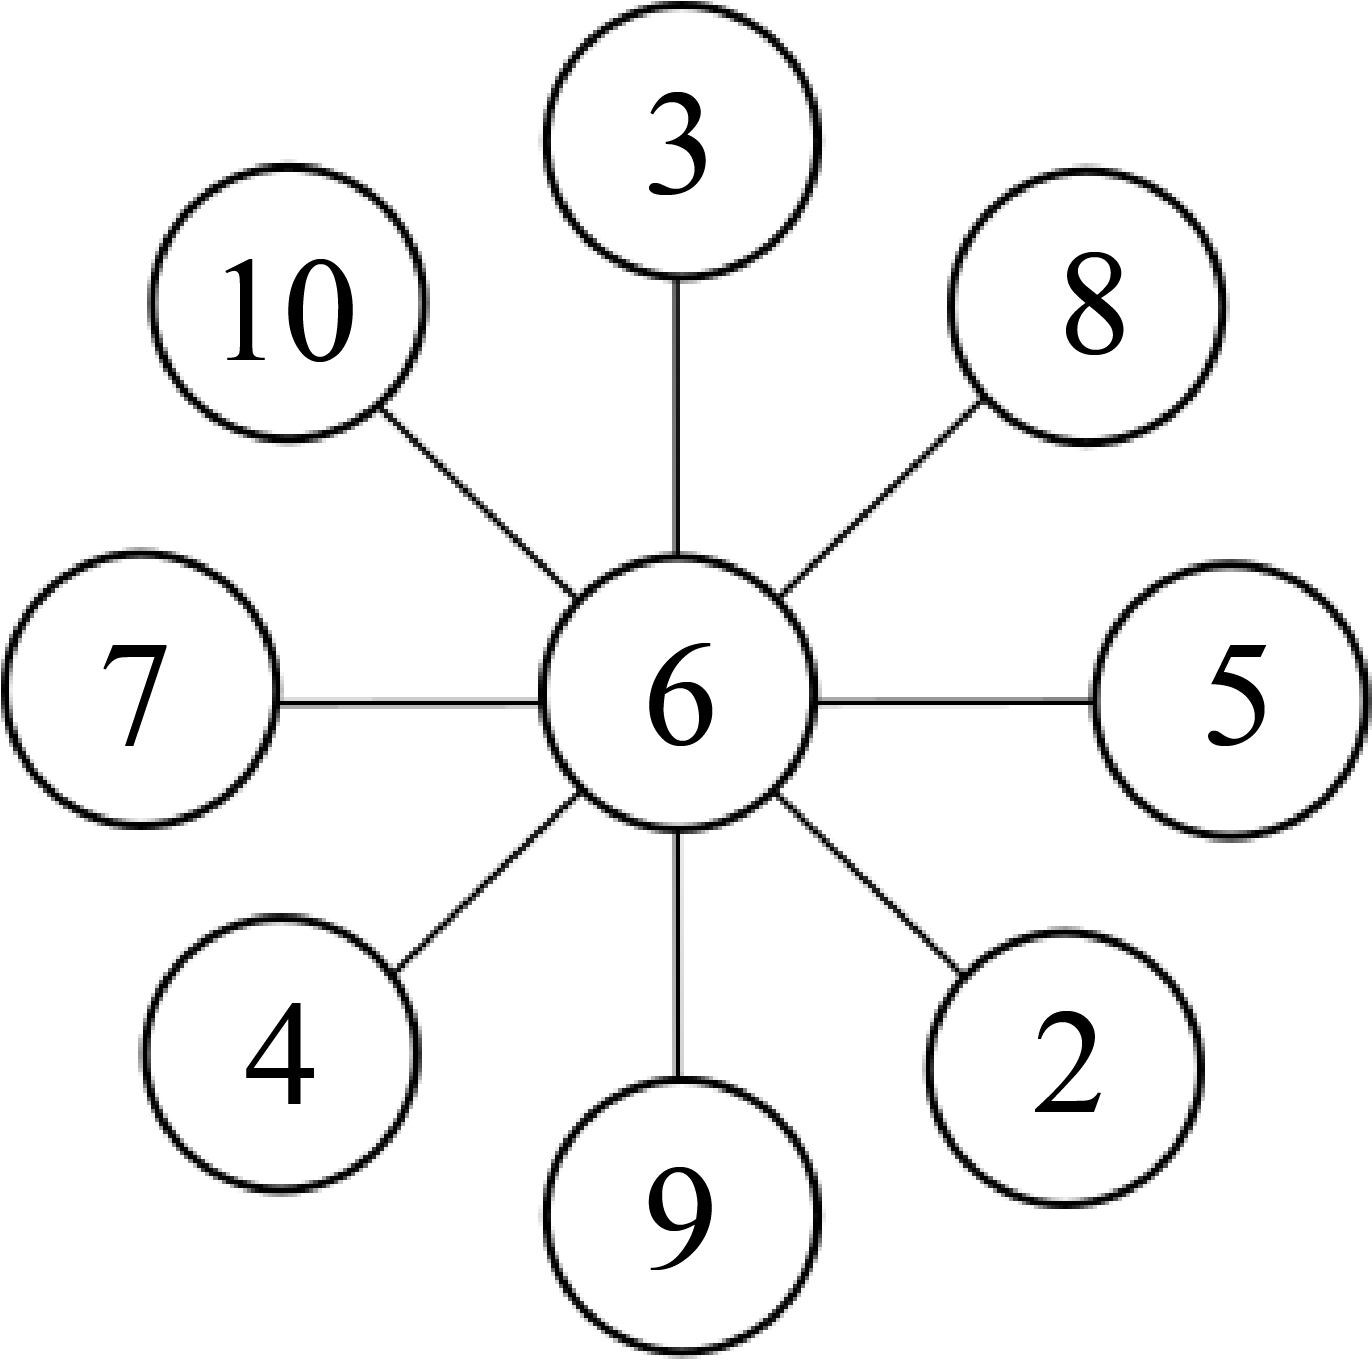 6 is the middle number. The pairs of numbers placed on the same line are 2 and 10, 3 and 9, 4 and 8, 5 and 7.